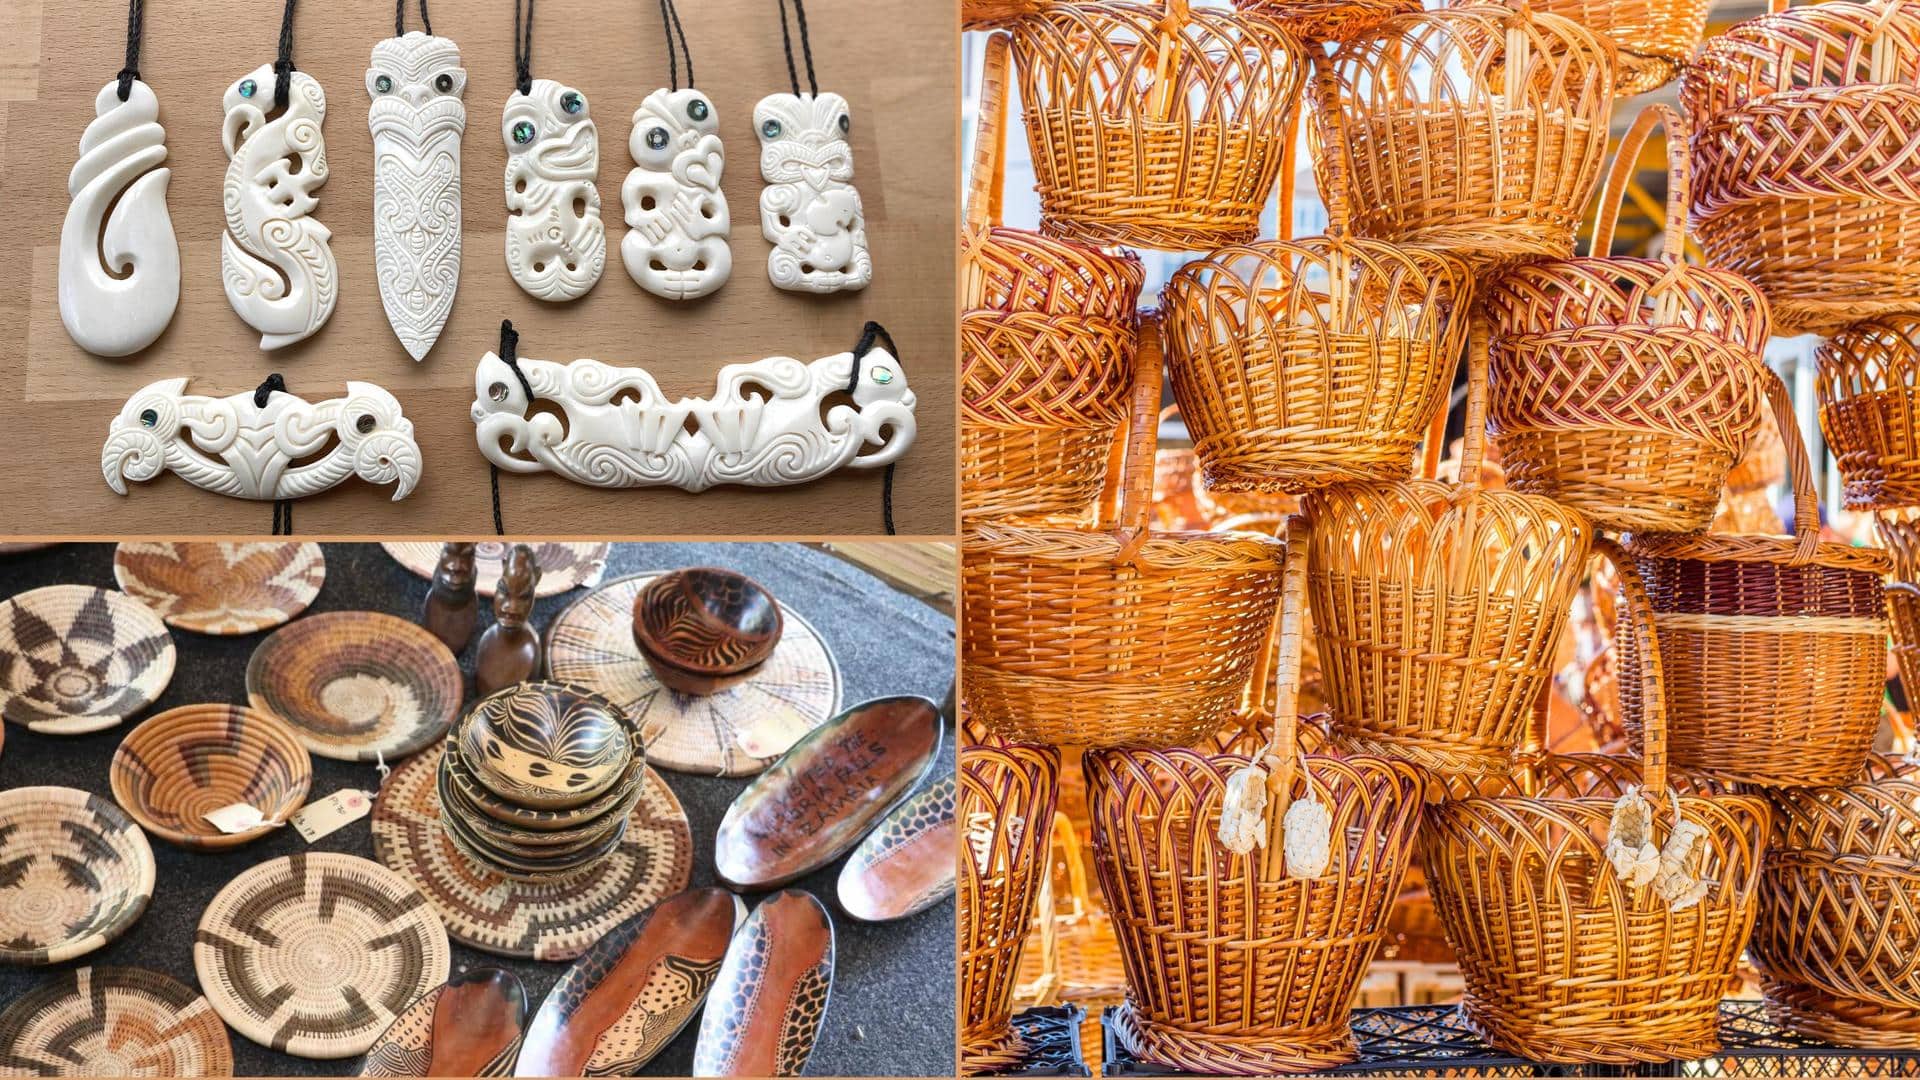 Souvenirs from Botswana that you should grab for home